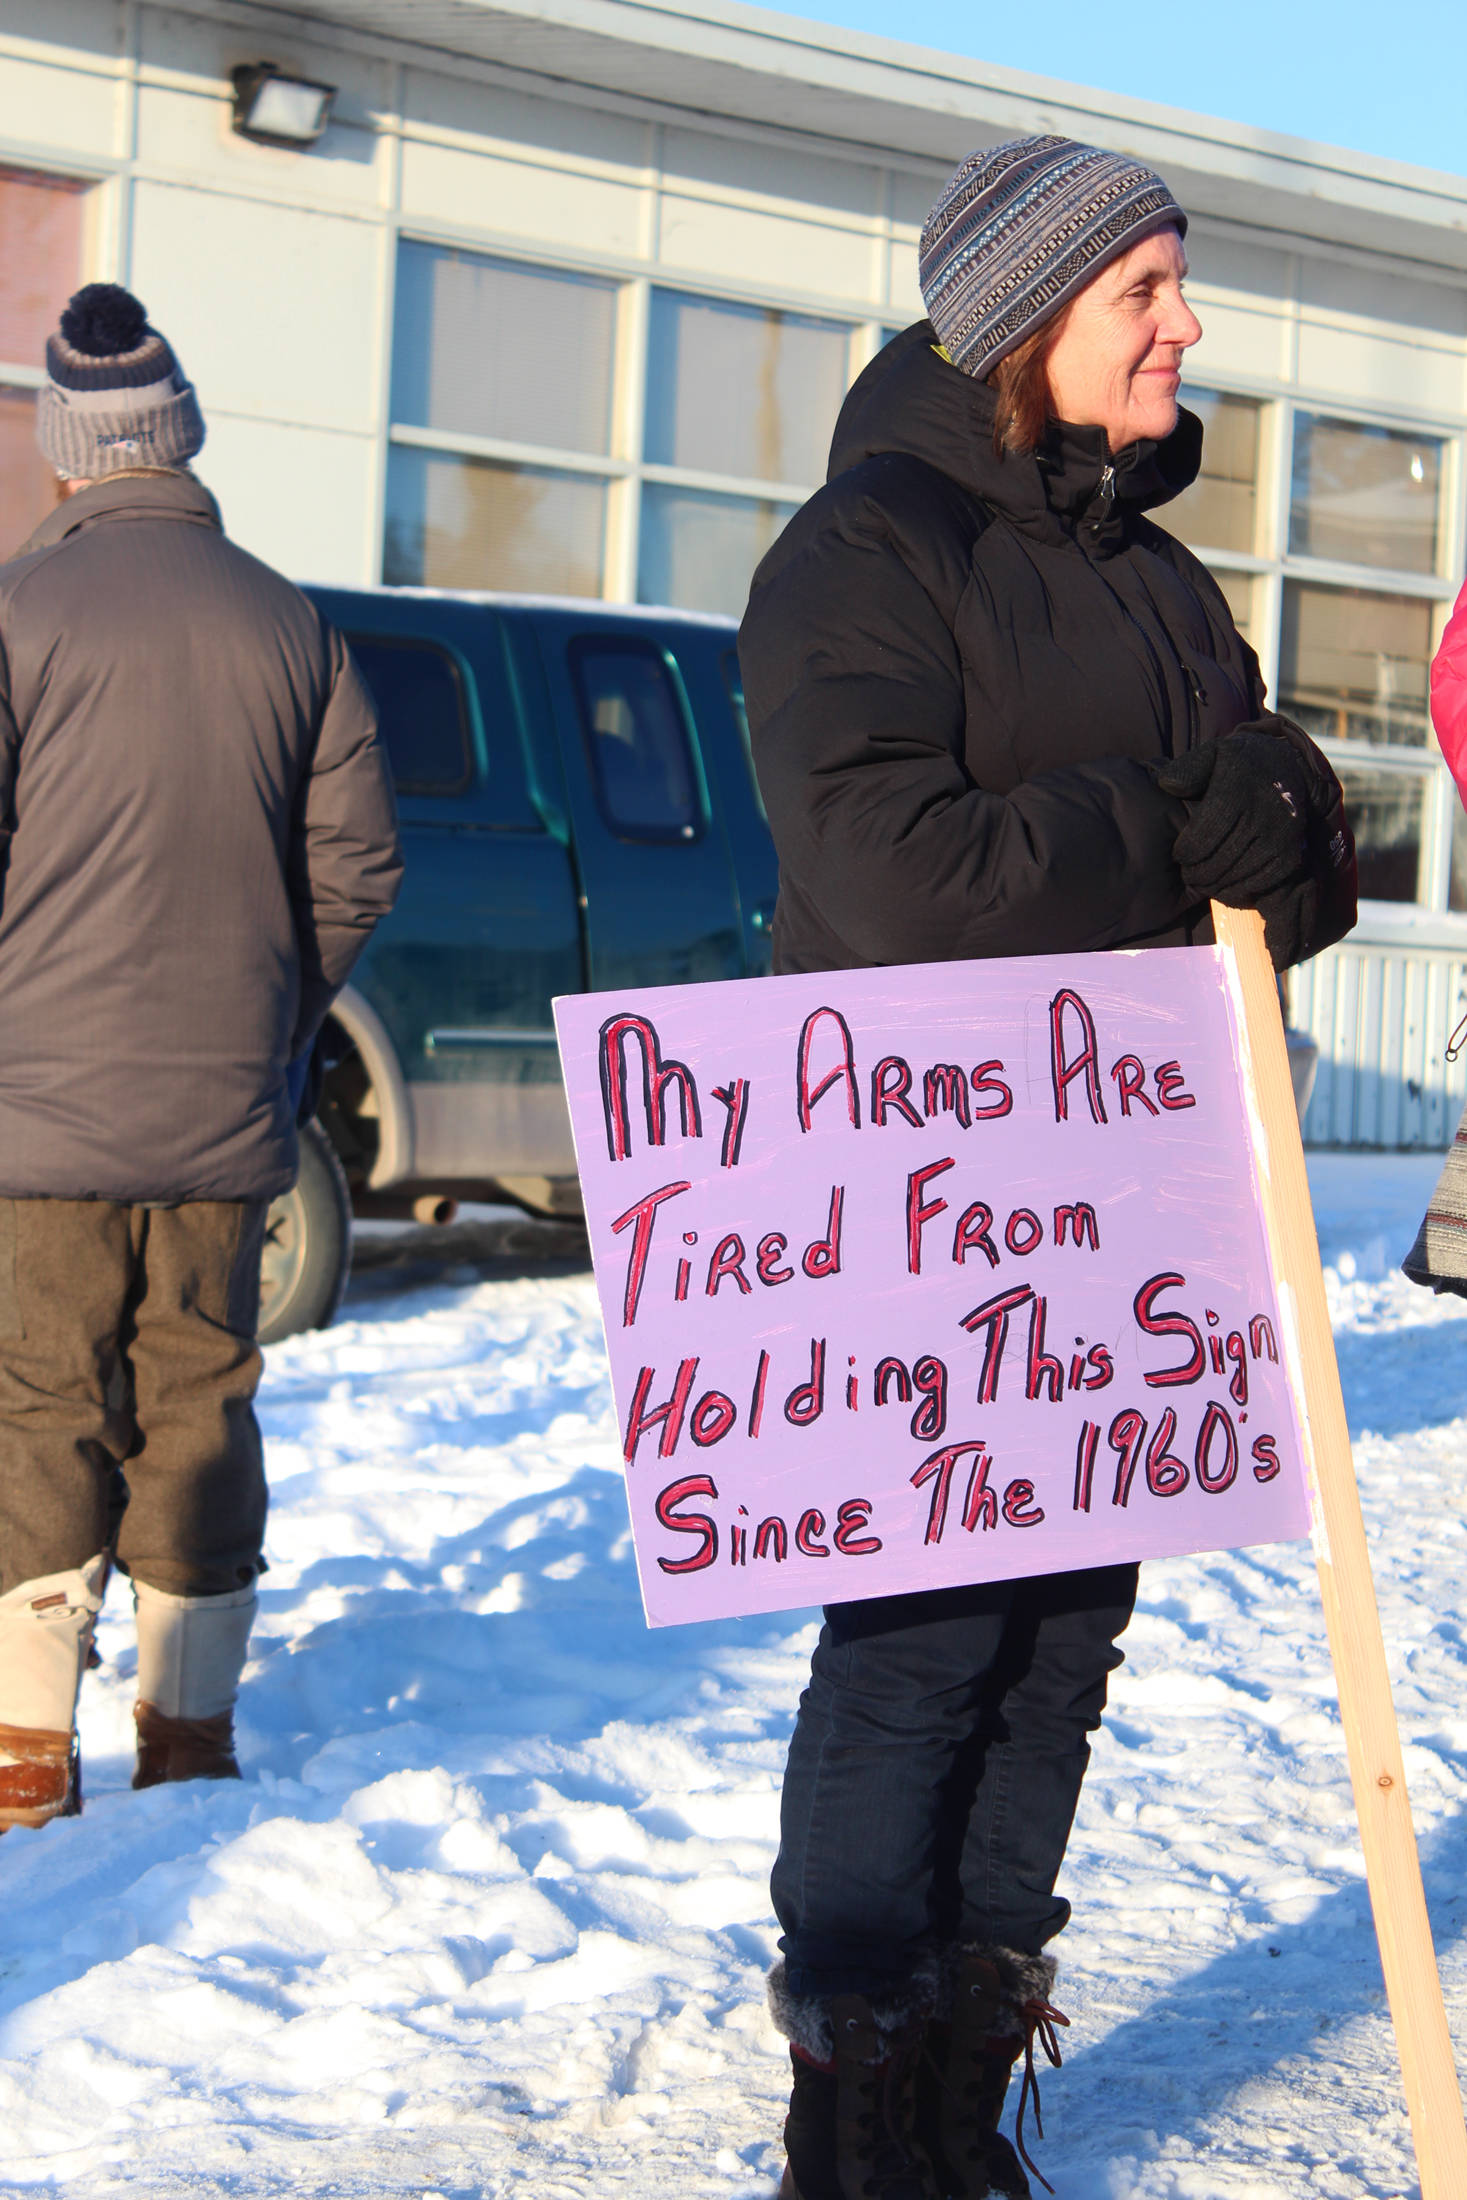 A woman holds a sign that reads “My arms are tired from holding this sign since the 1960s” before the fourth Women’s March on Homer on Saturday, Jan. 18, 2020 in Homer, Alaska. About 300 community members gathered outside the Homer Education and Recreation Complex before marching down Pioneer Avenue to WKFL Park. (Photo by Megan Pacer/Homer News)